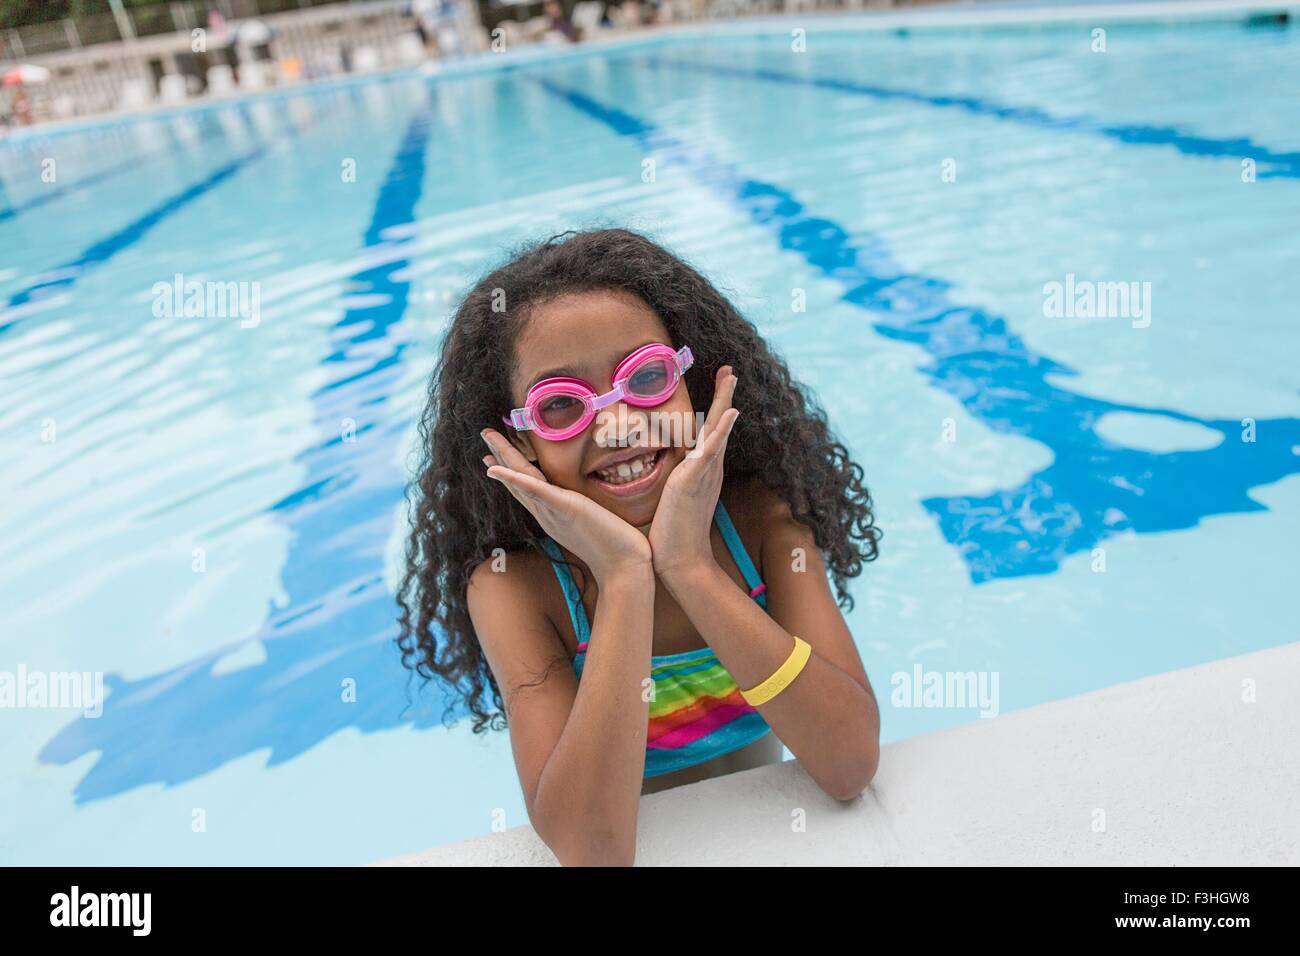 Portrait of girl in swimming pool wearing swimming goggles, looking at camera smiling Stock Photo